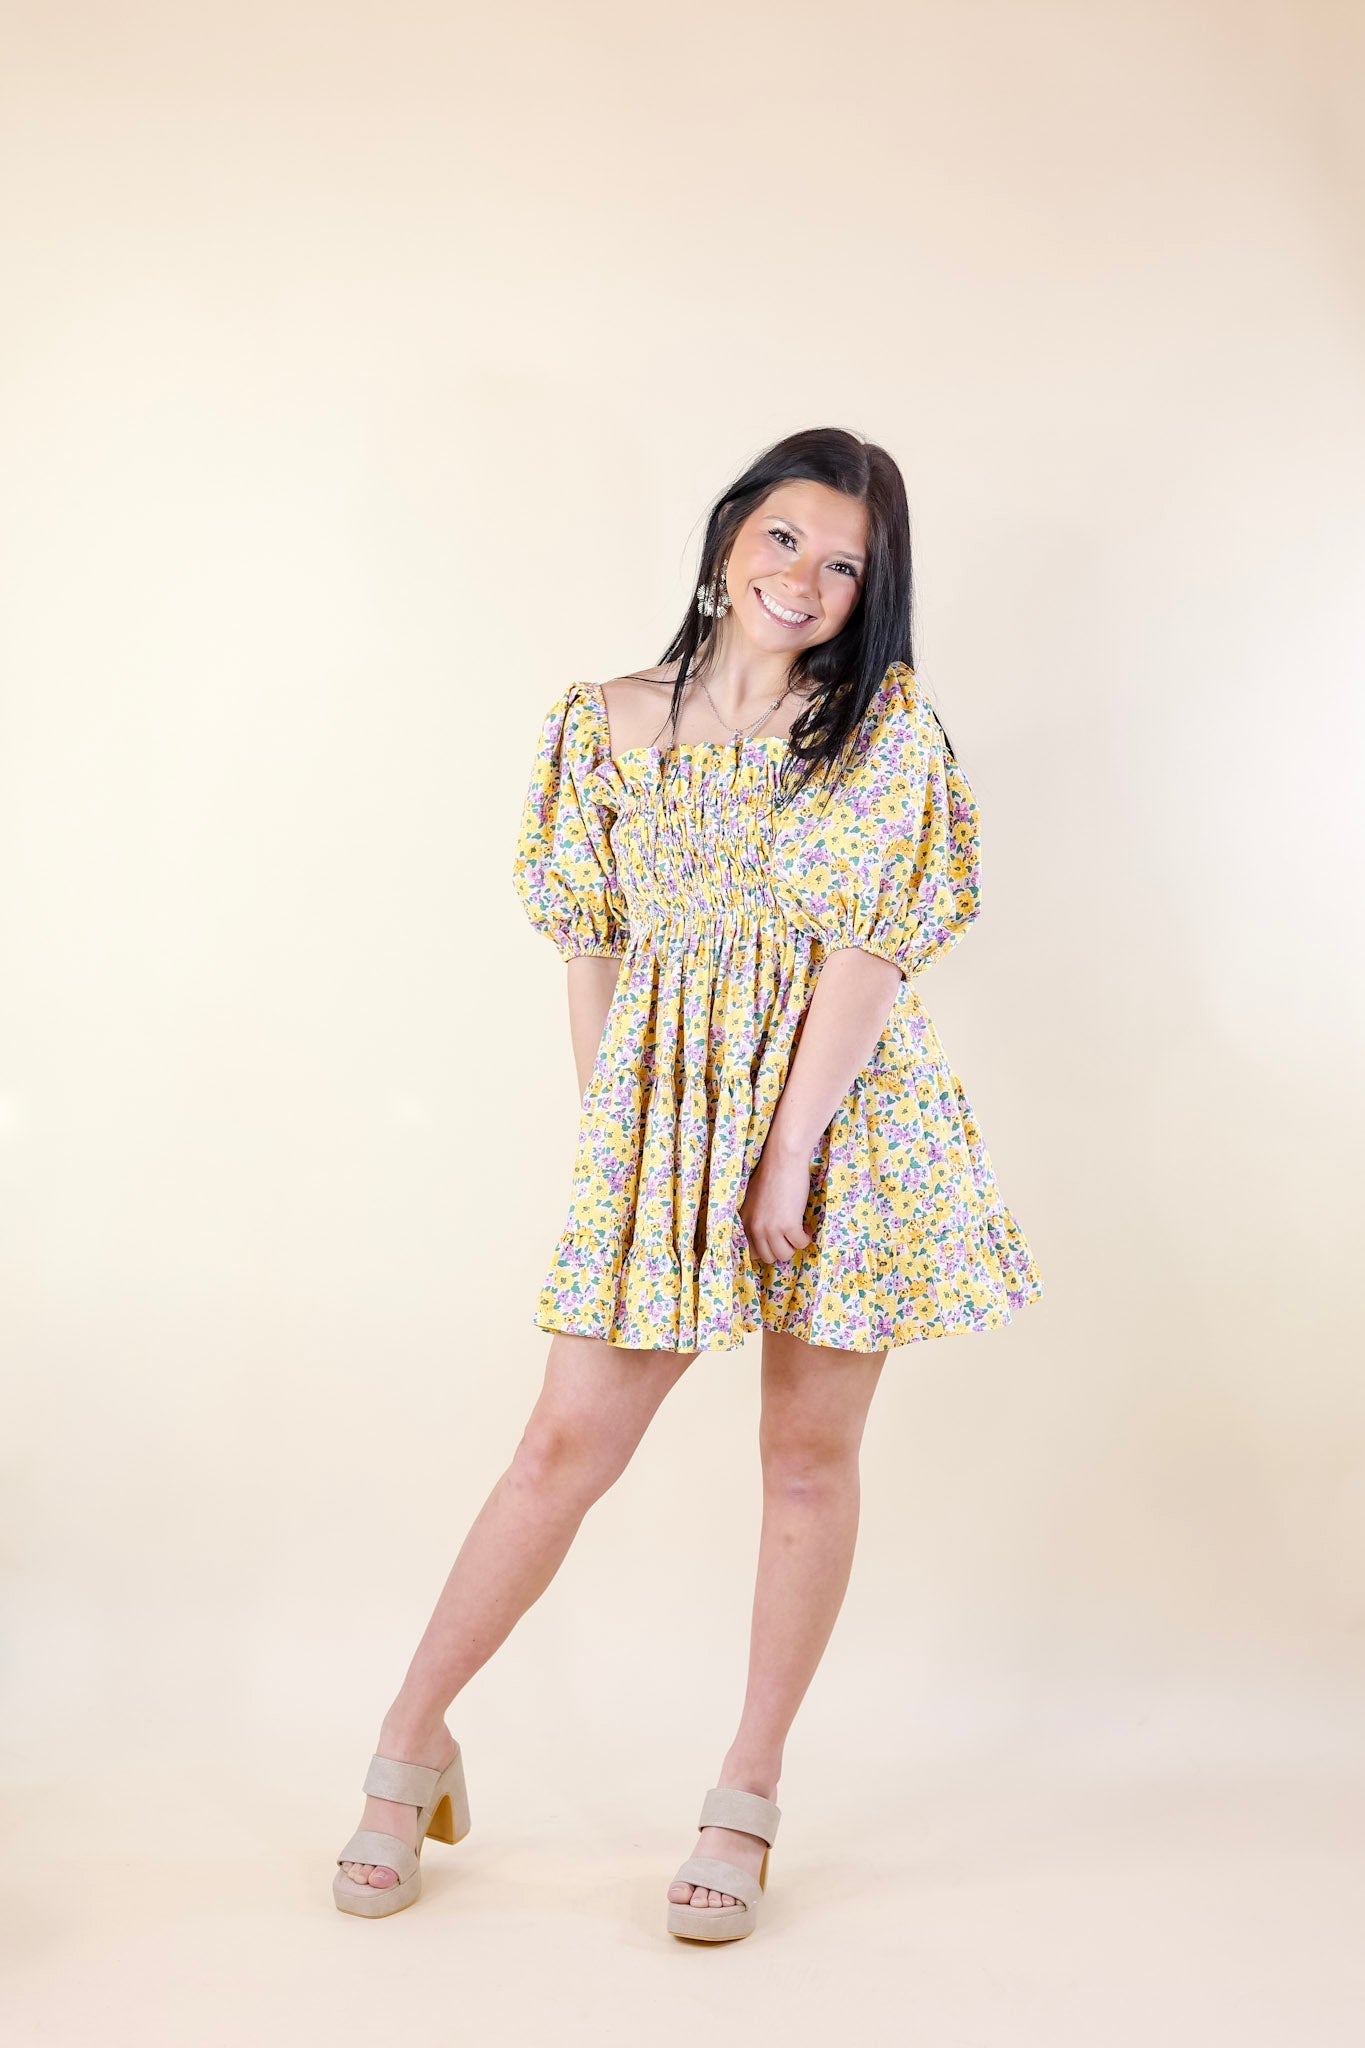 BuddyLove | Spencer Puff Sleeve Mini Dress in Sunny Hunny (Yellow) - Giddy Up Glamour Boutique